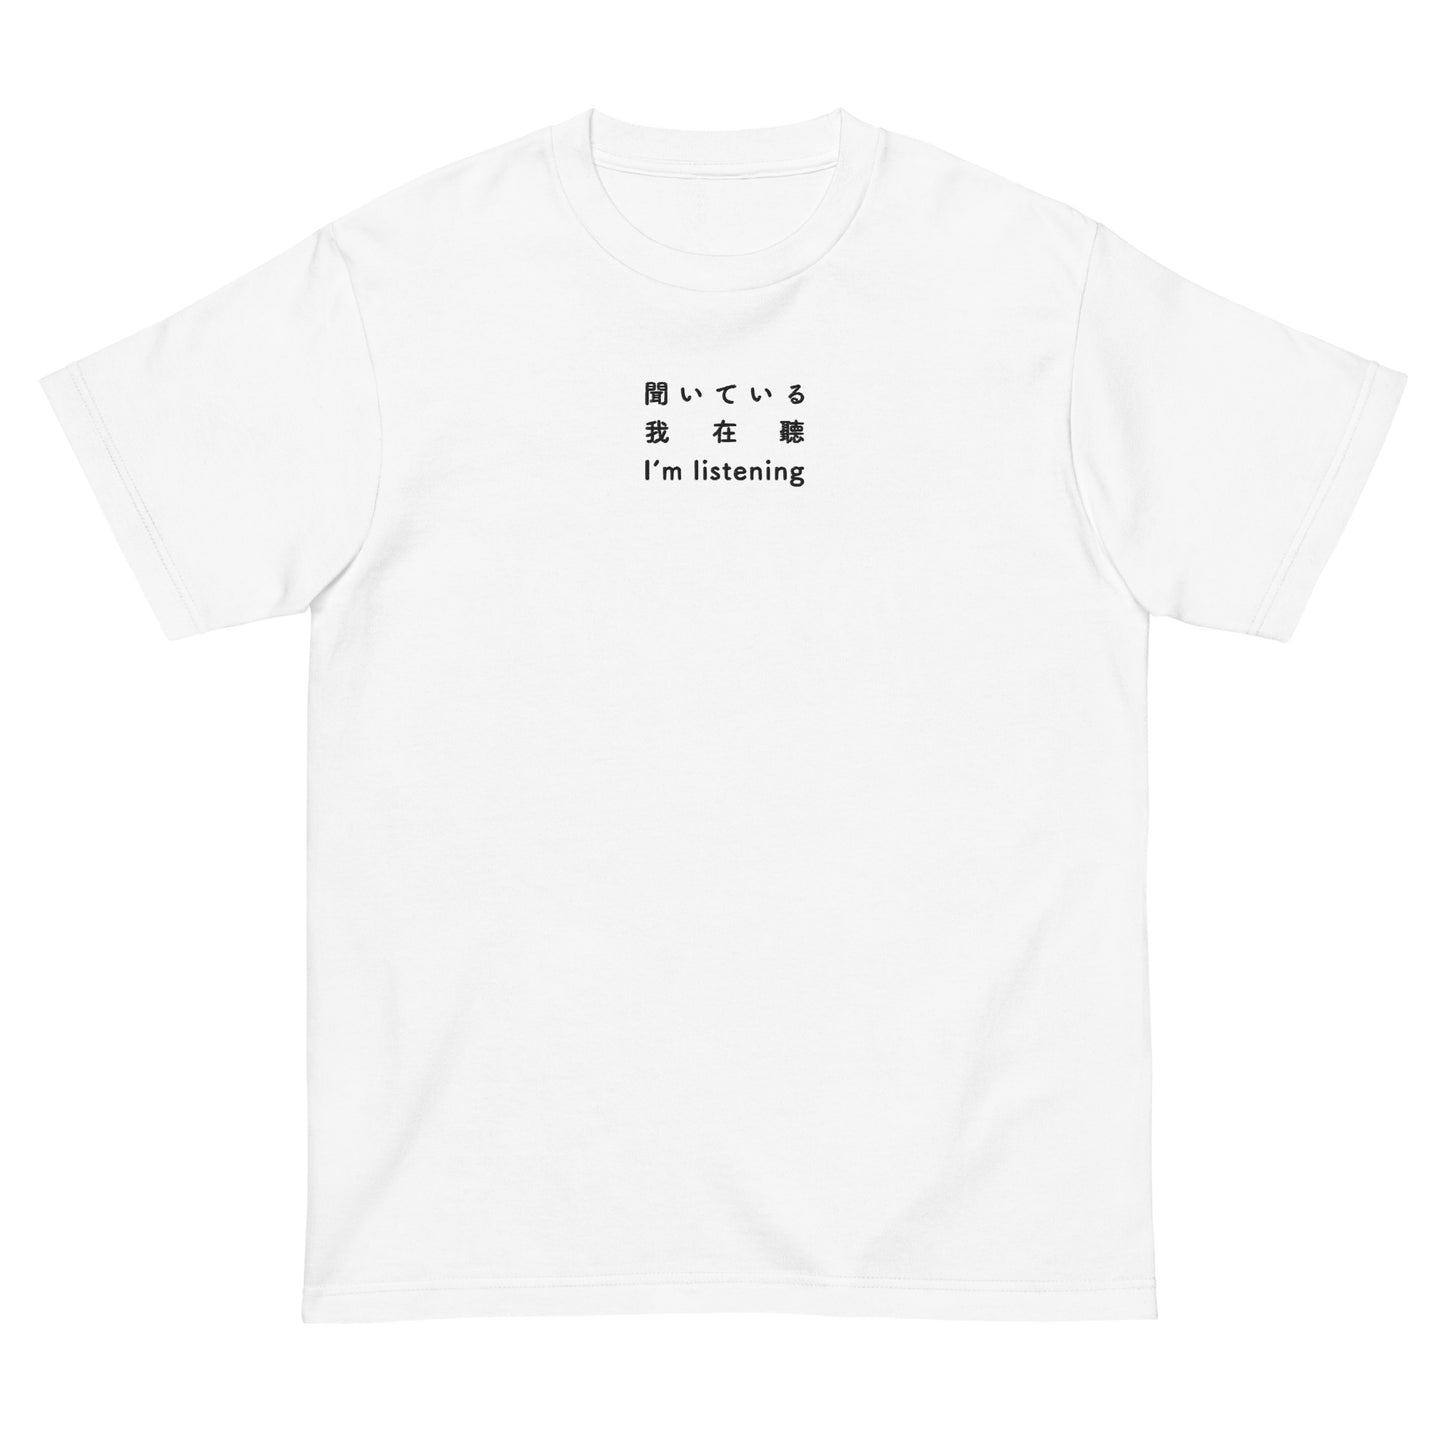 White High Quality Tee - Front Design with an Black Embroidery "I'm listening" in Japanese,Chinese and English